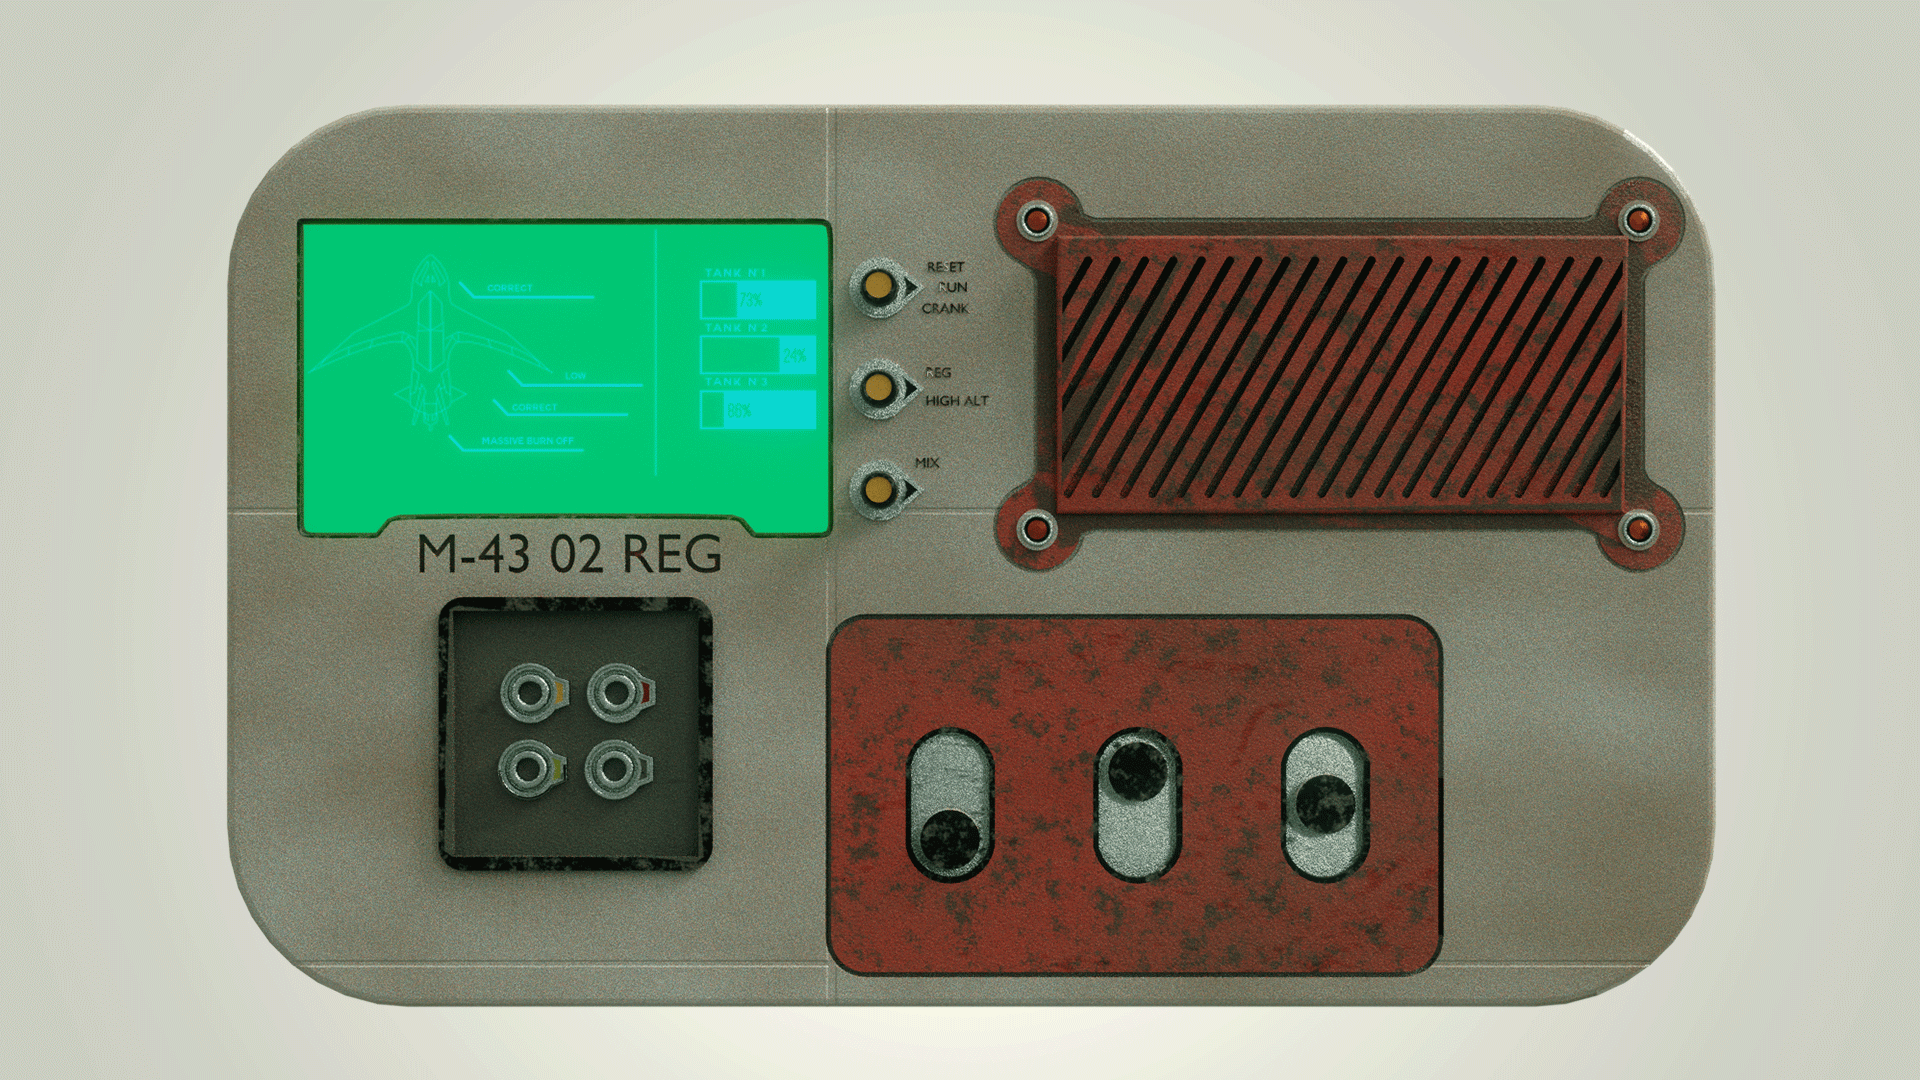 TXI-4400 Air Master Regulation Unit - A Sci Fi Console preview image 4